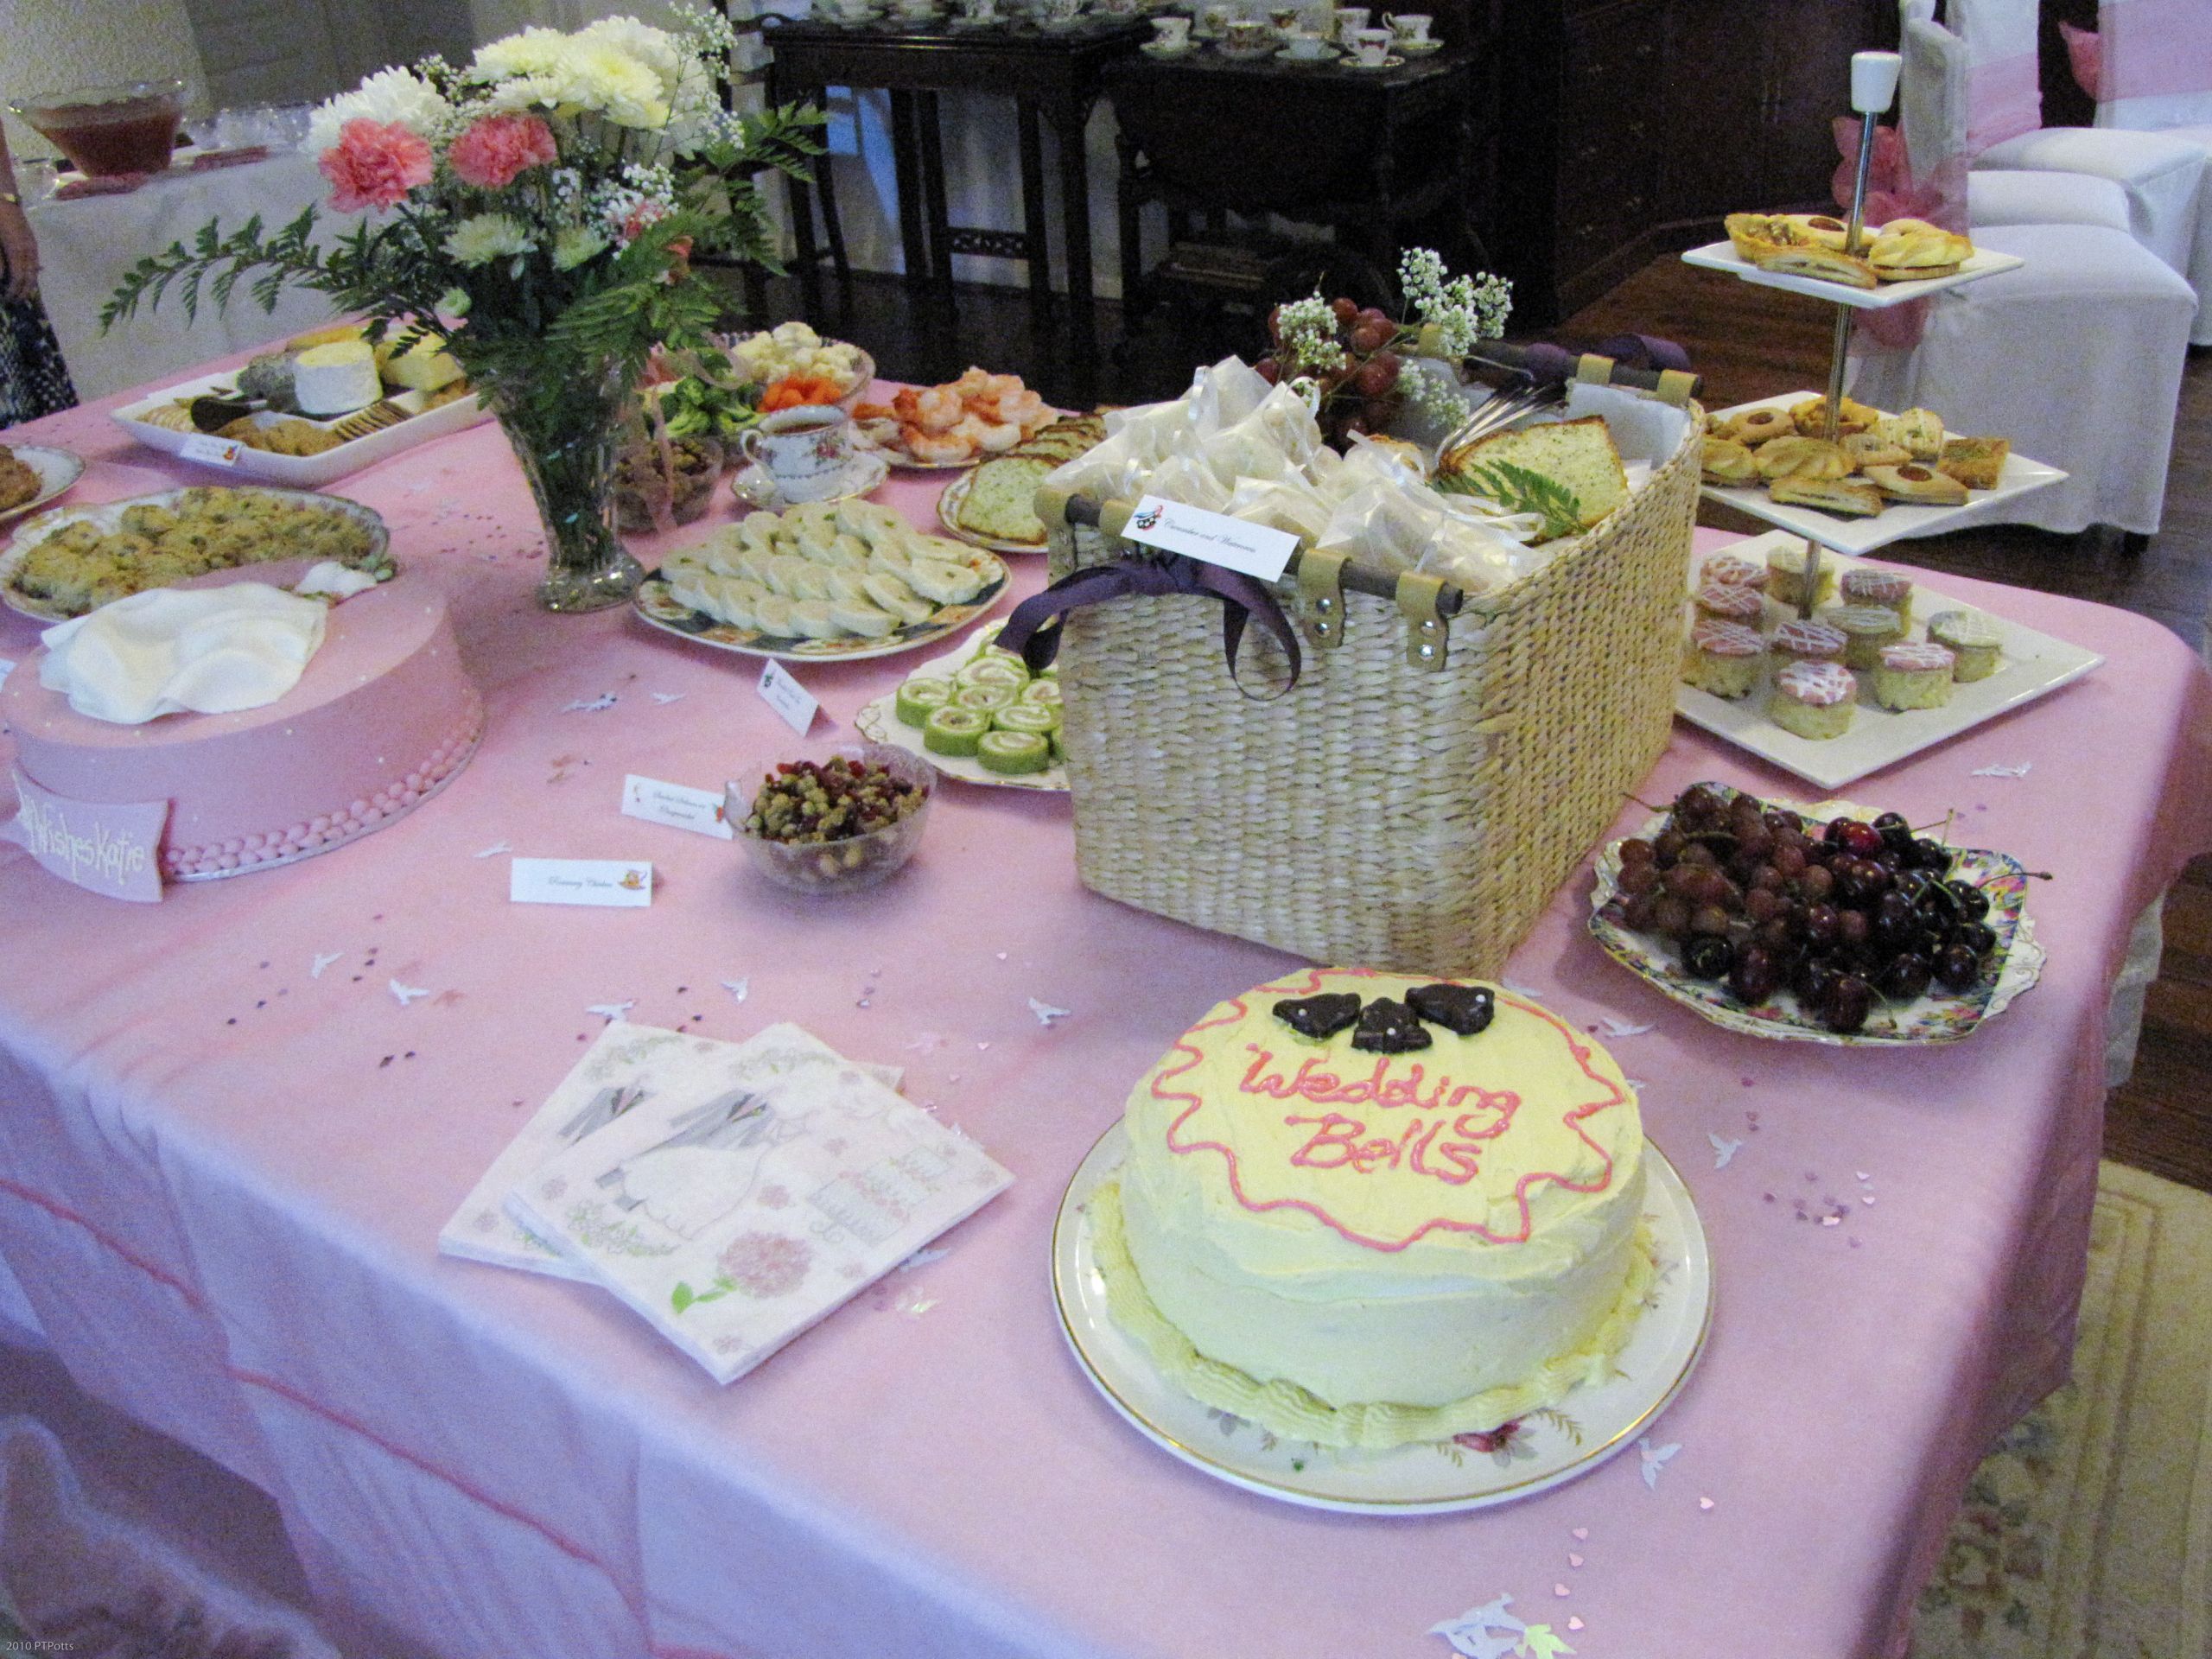 Food Ideas For Tea Party Bridal Shower
 How To Host A Jane Austen Tea Party Bridal Shower